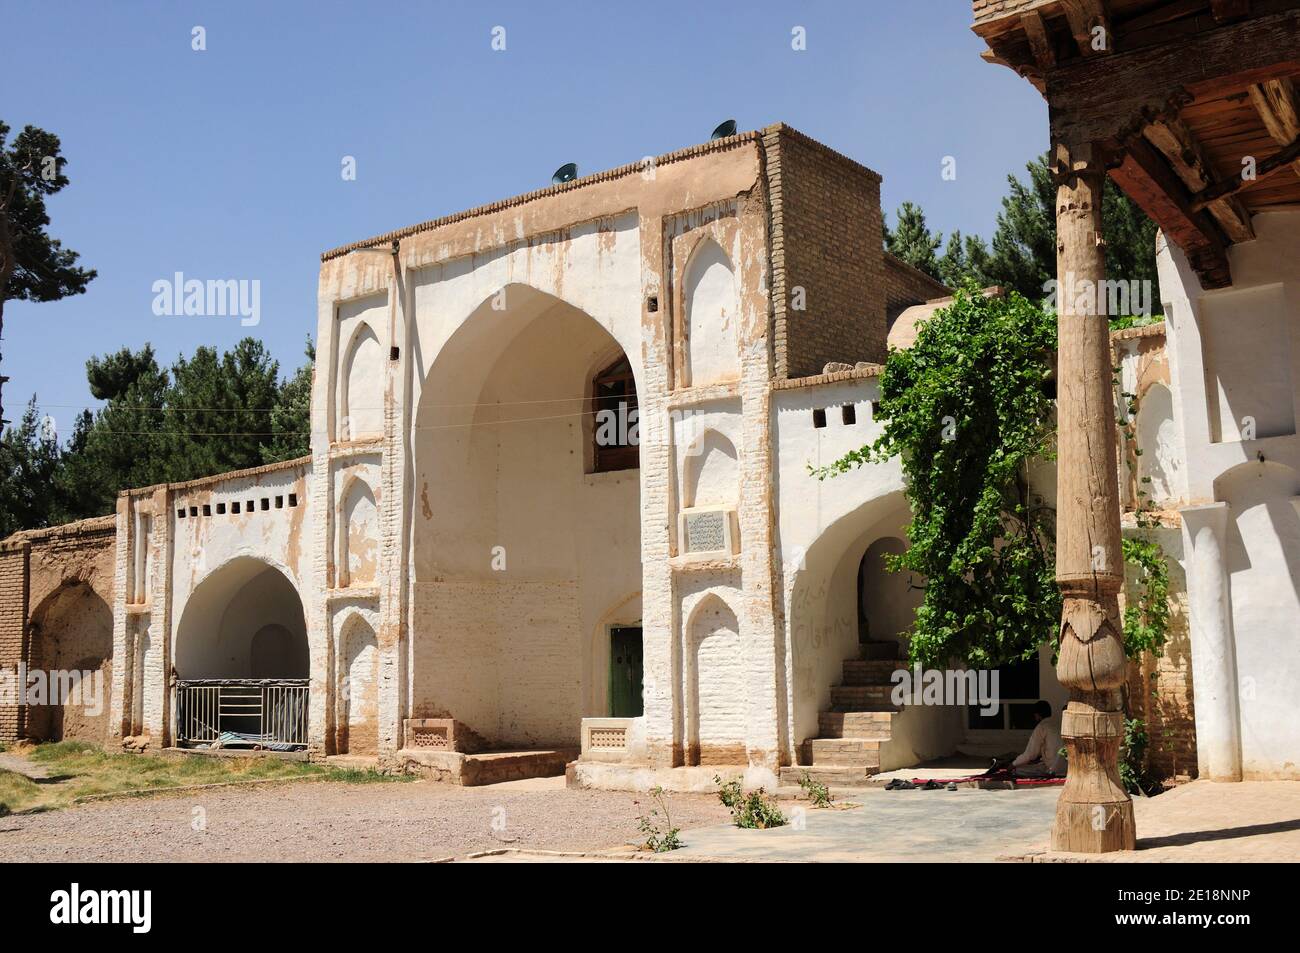 A medieval madrasah in Herat. The brickwork in the madrasa is remarkable. Herat, Afghanistan. Stock Photo